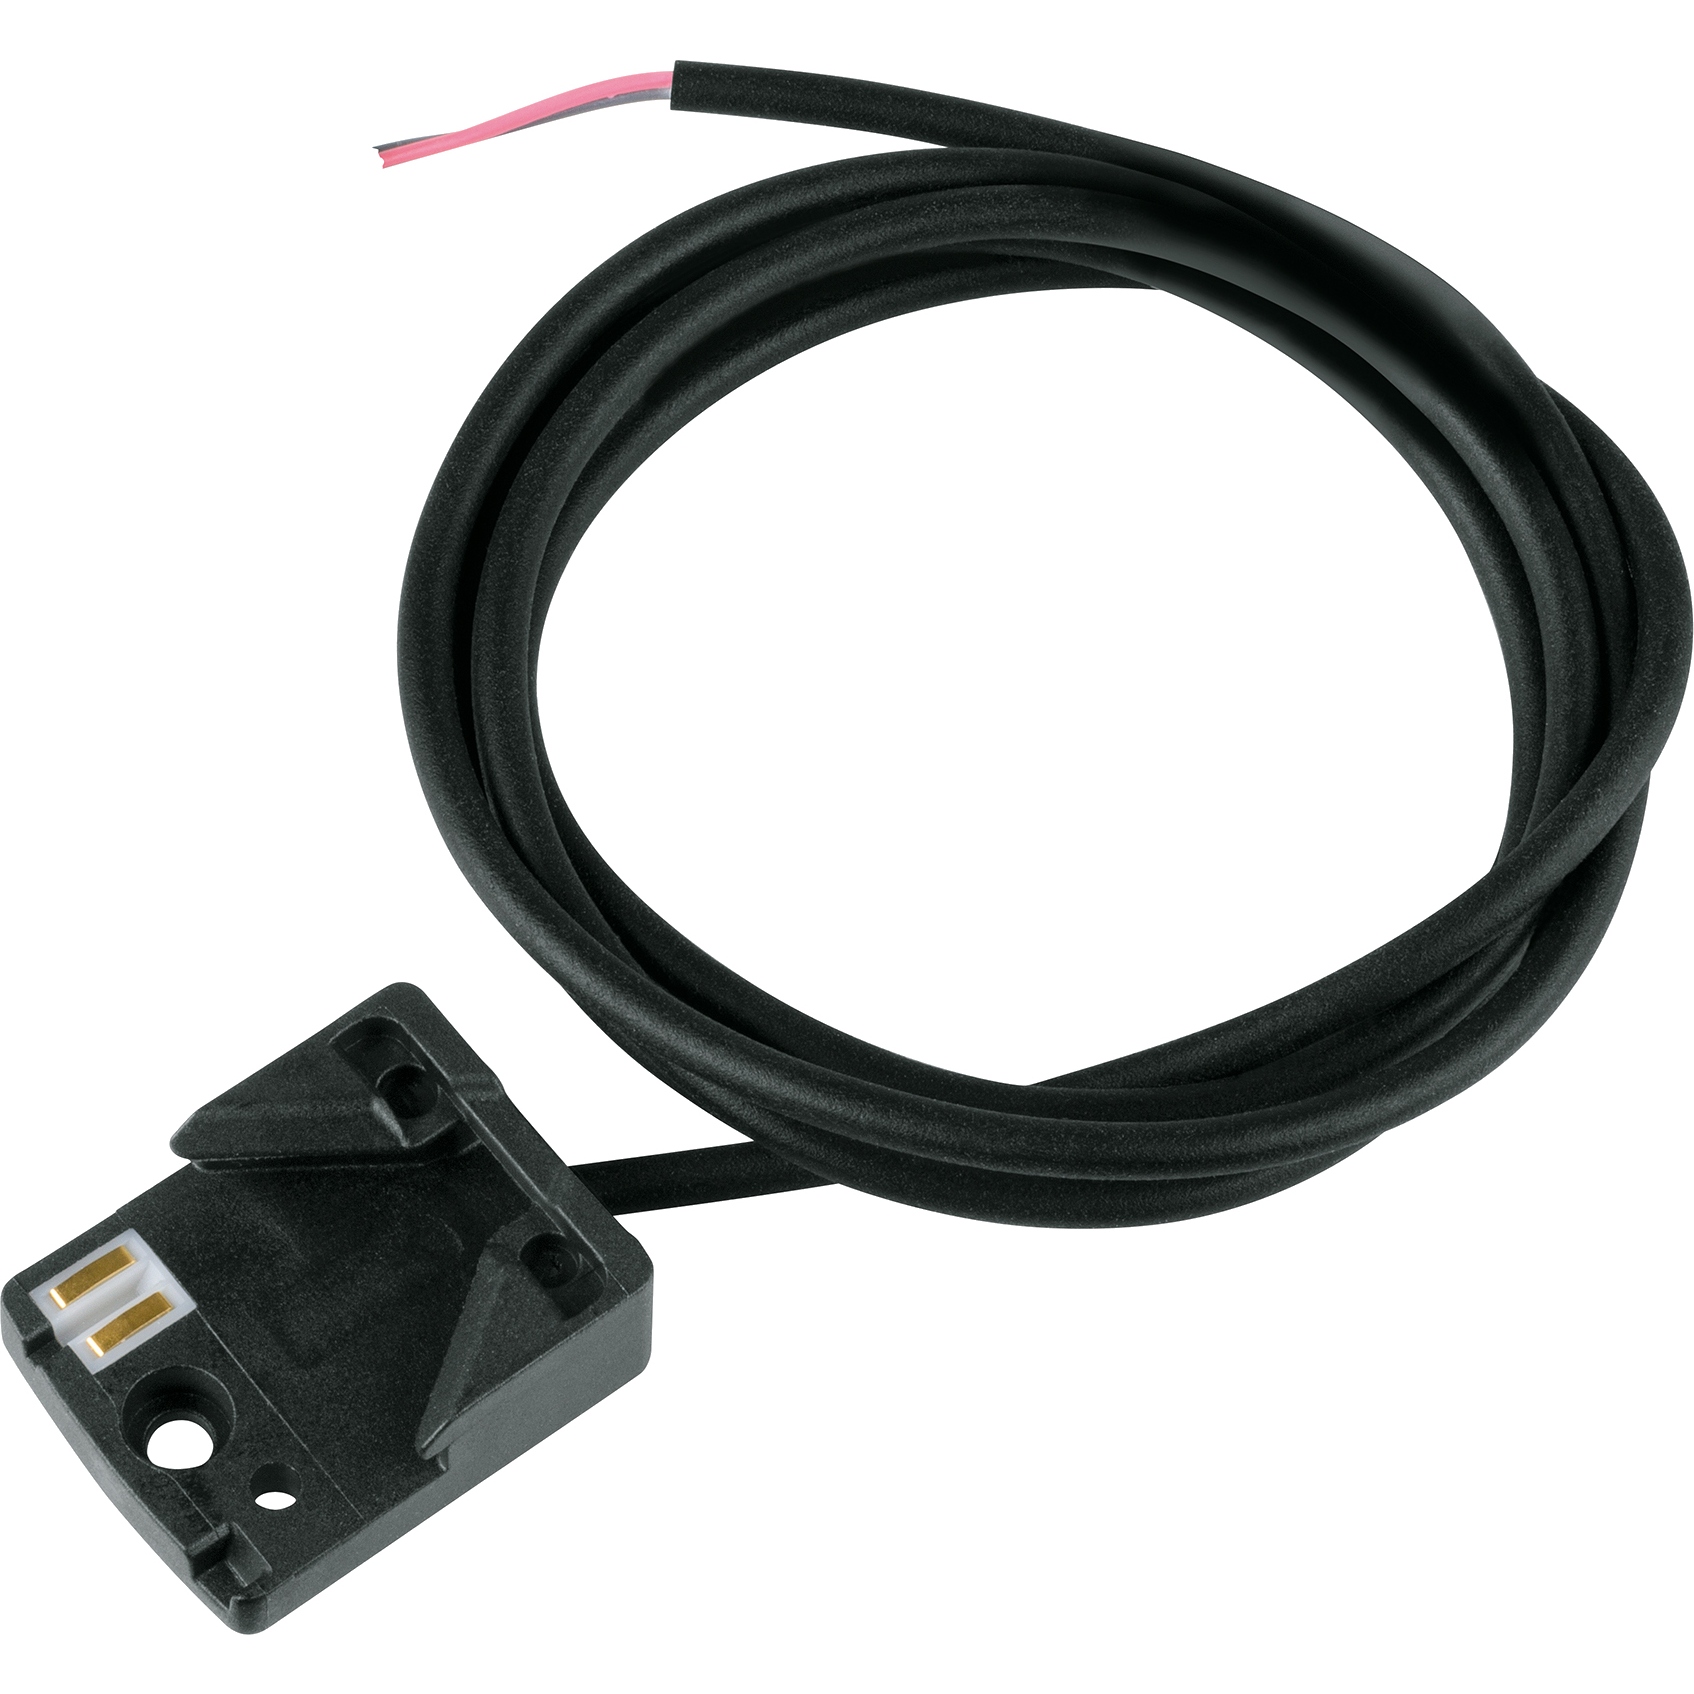 Productfoto van MonkeyLink Interface Connect One4All REAR 800mm - Cable for E-Bike Rear Light